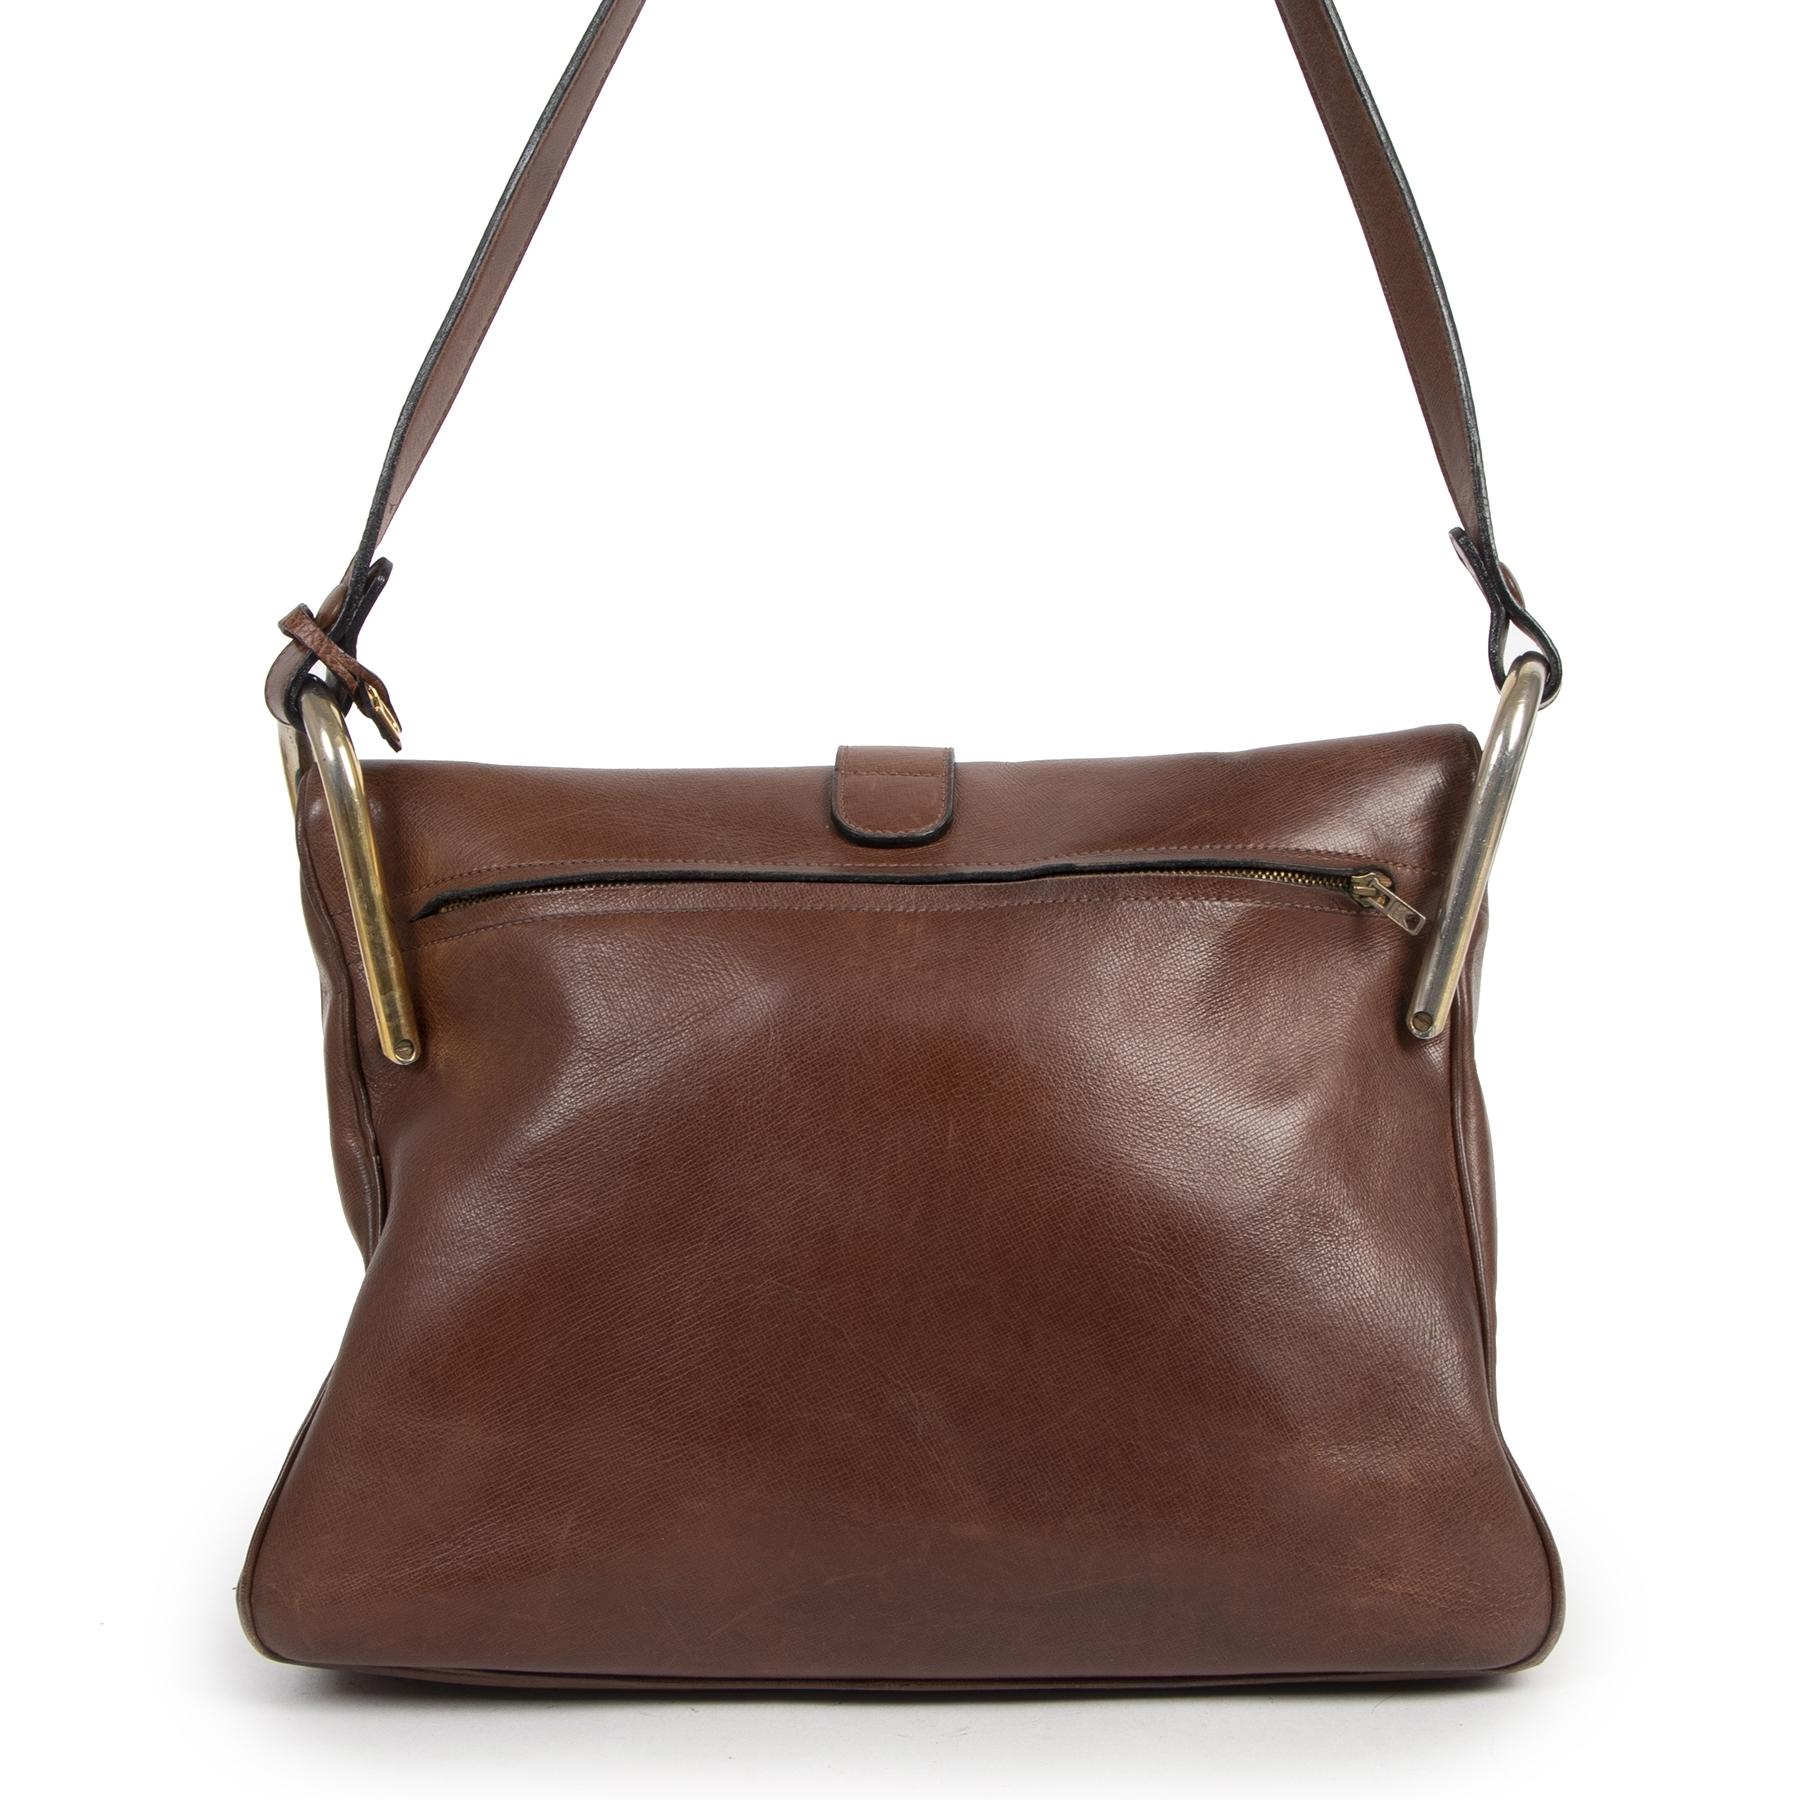 Good preloved condition

Delvaux Vintage Brown Givry Shoulder Bag 

This Delvaux Givry shoulder bag is perfect for storing all your essentials. 
This spacious bag is crafted in brown leather and features gold-tone hardware and a cognac suede